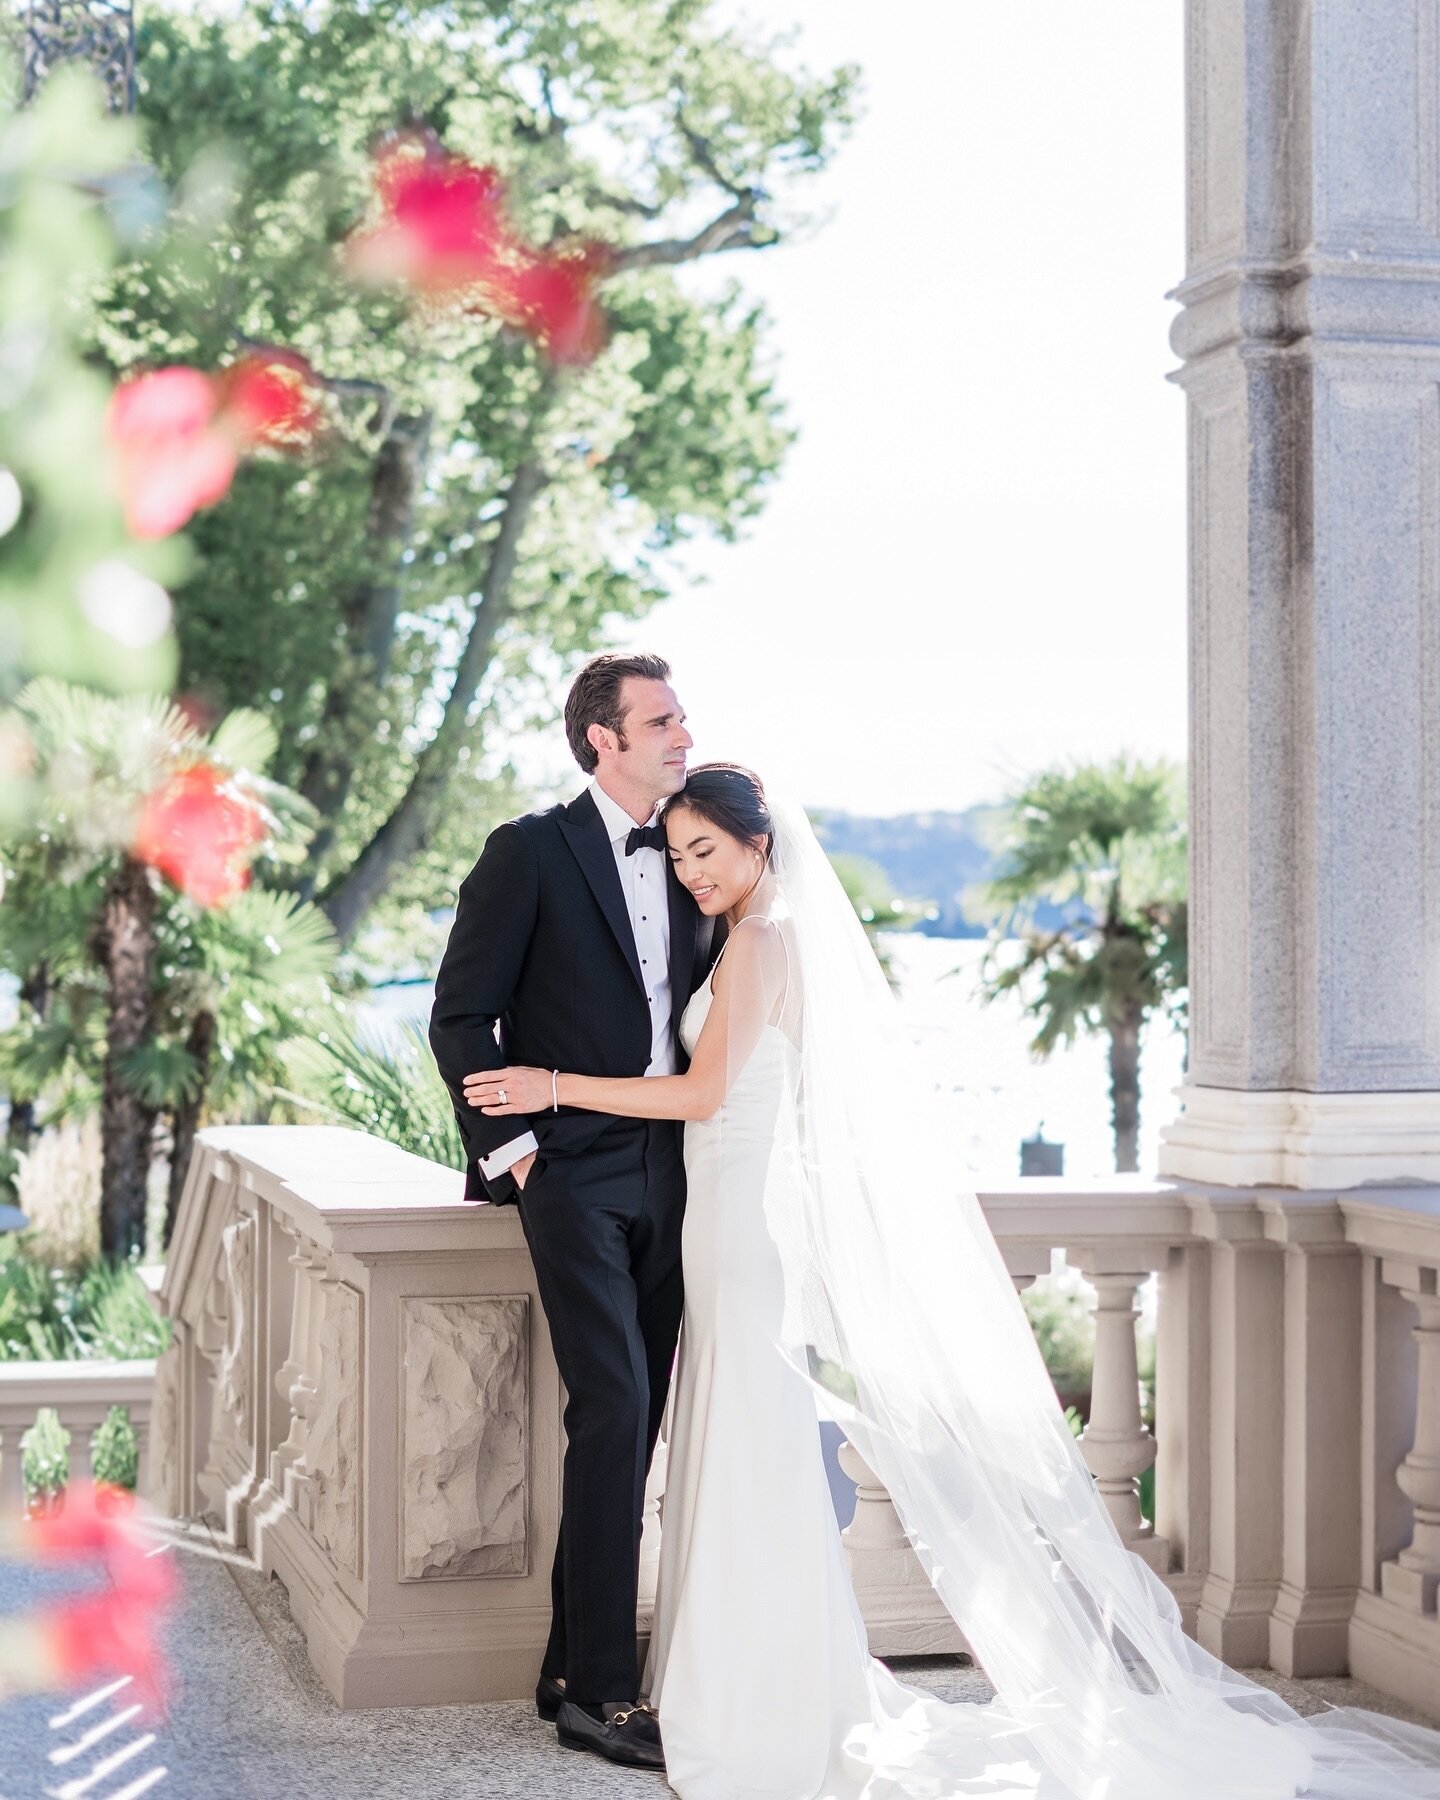 Last weekend before 
Christmas lovers🥰#happyfriday

We are finishing this year with a little showcase of H&amp;E&rsquo;s elopement at lake como last year in August🚤

Photography @loryle_photography 
Venue @mo_lagodicomo 

Starting next week we are 